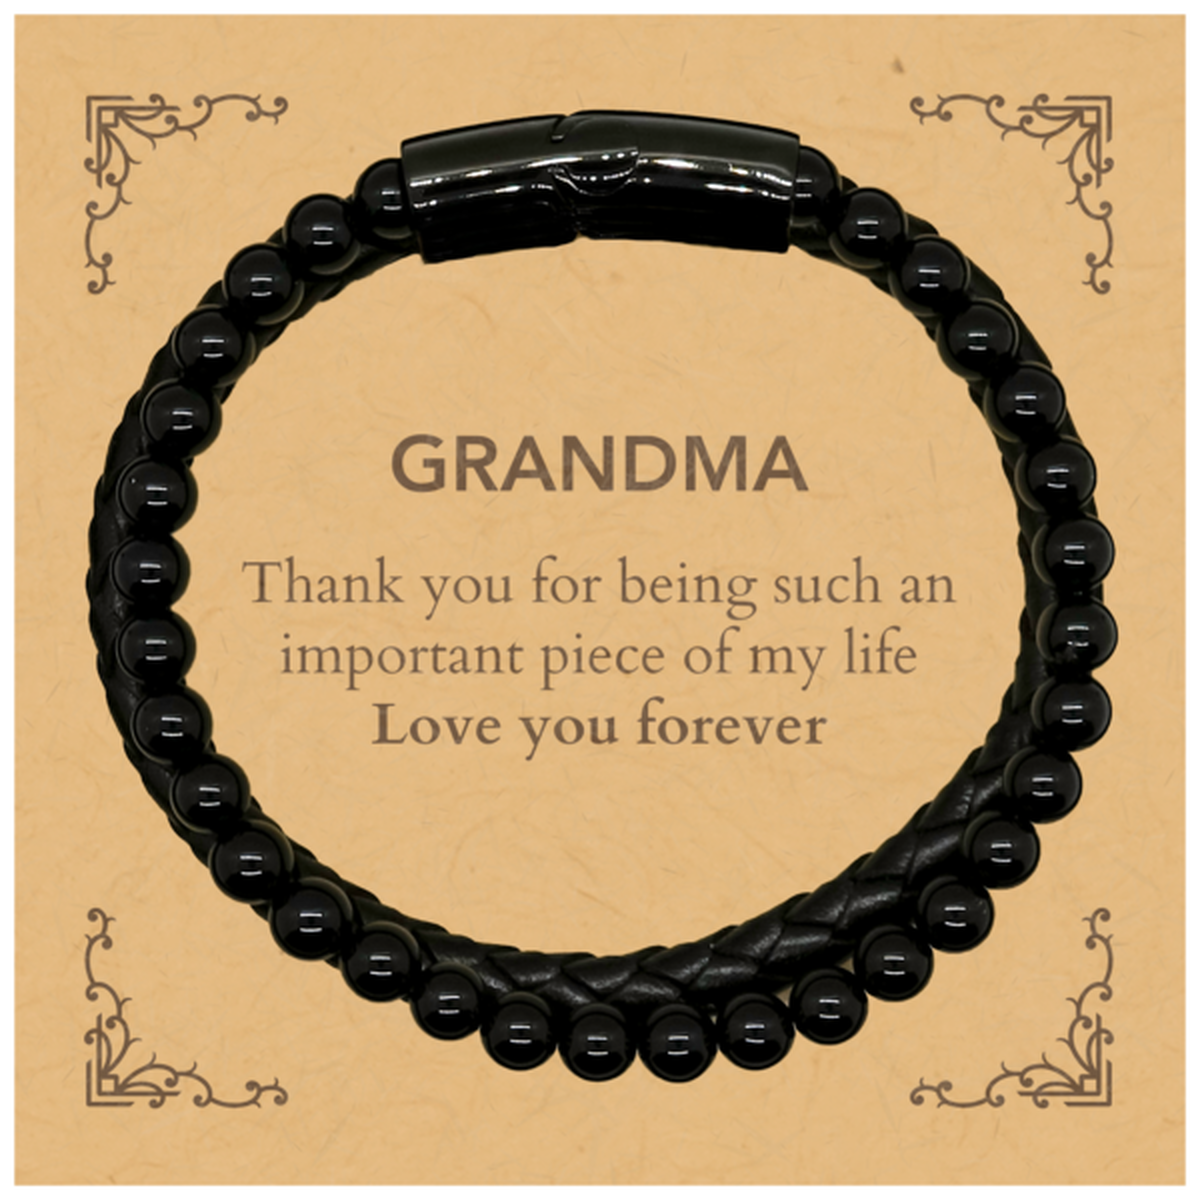 Appropriate Grandma Stone Leather Bracelets Epic Birthday Gifts for Grandma Thank you for being such an important piece of my life Grandma Christmas Mothers Fathers Day